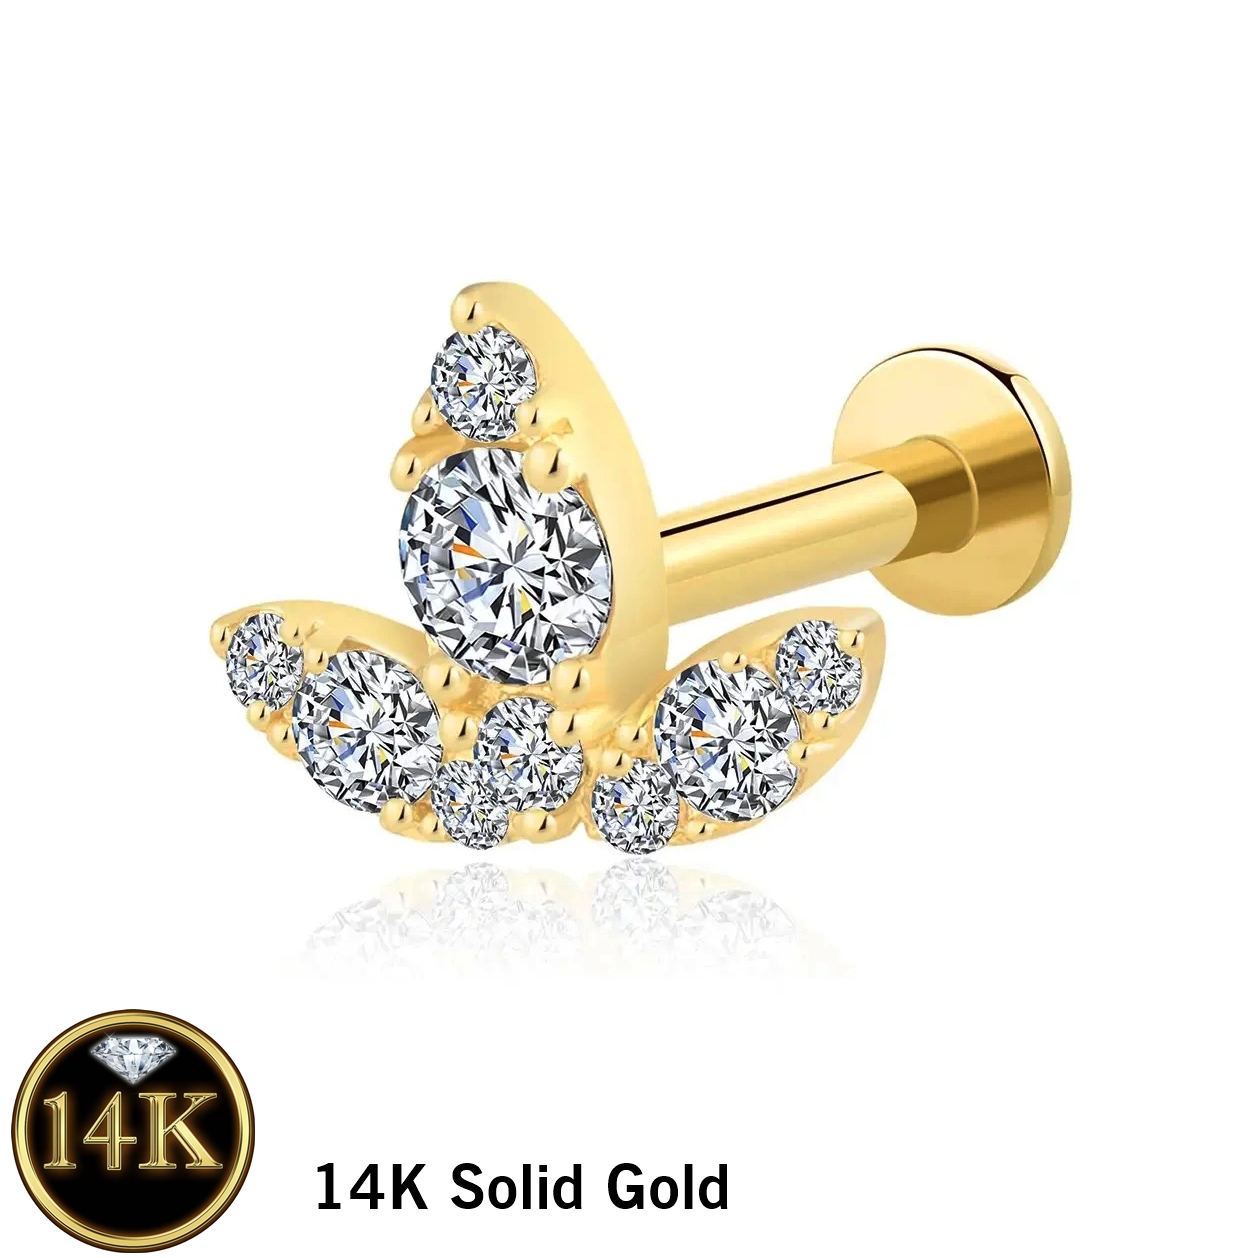 14K Solid Gold 18G Threadless Push Pin Flat Back 3CZ Sprout Stud